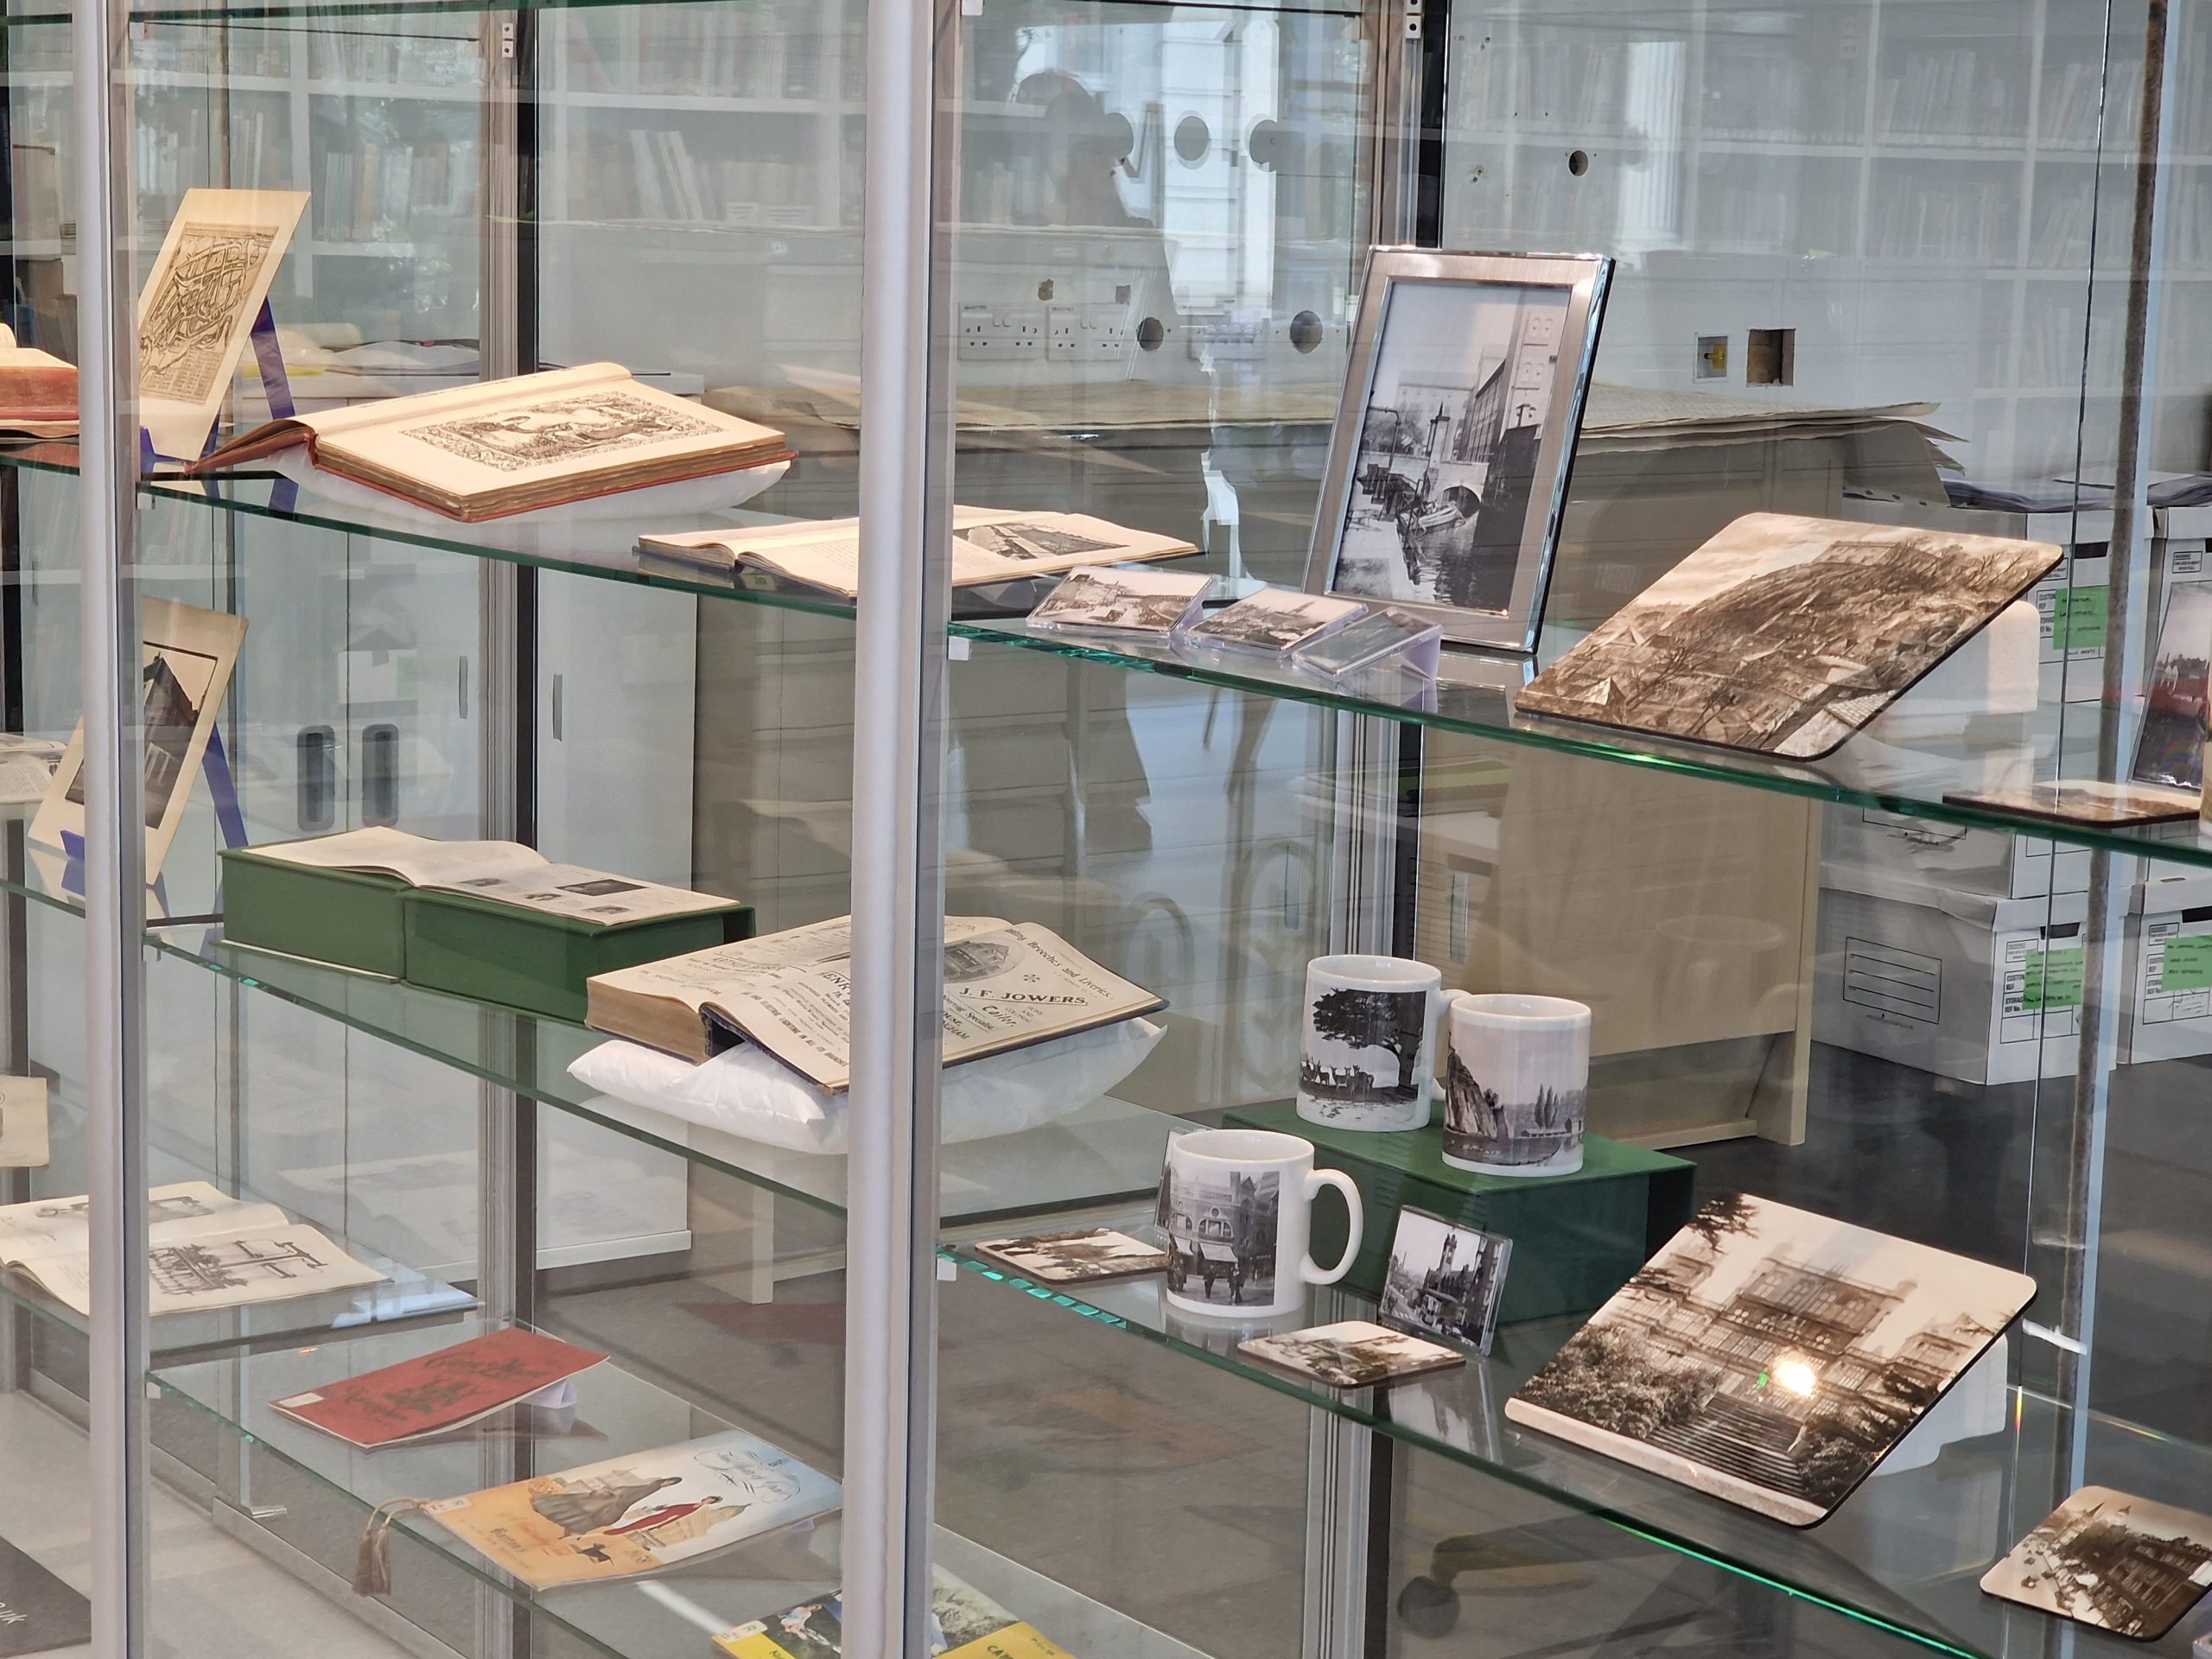 A series of historic books and maps are on display in an exhibition area scaled